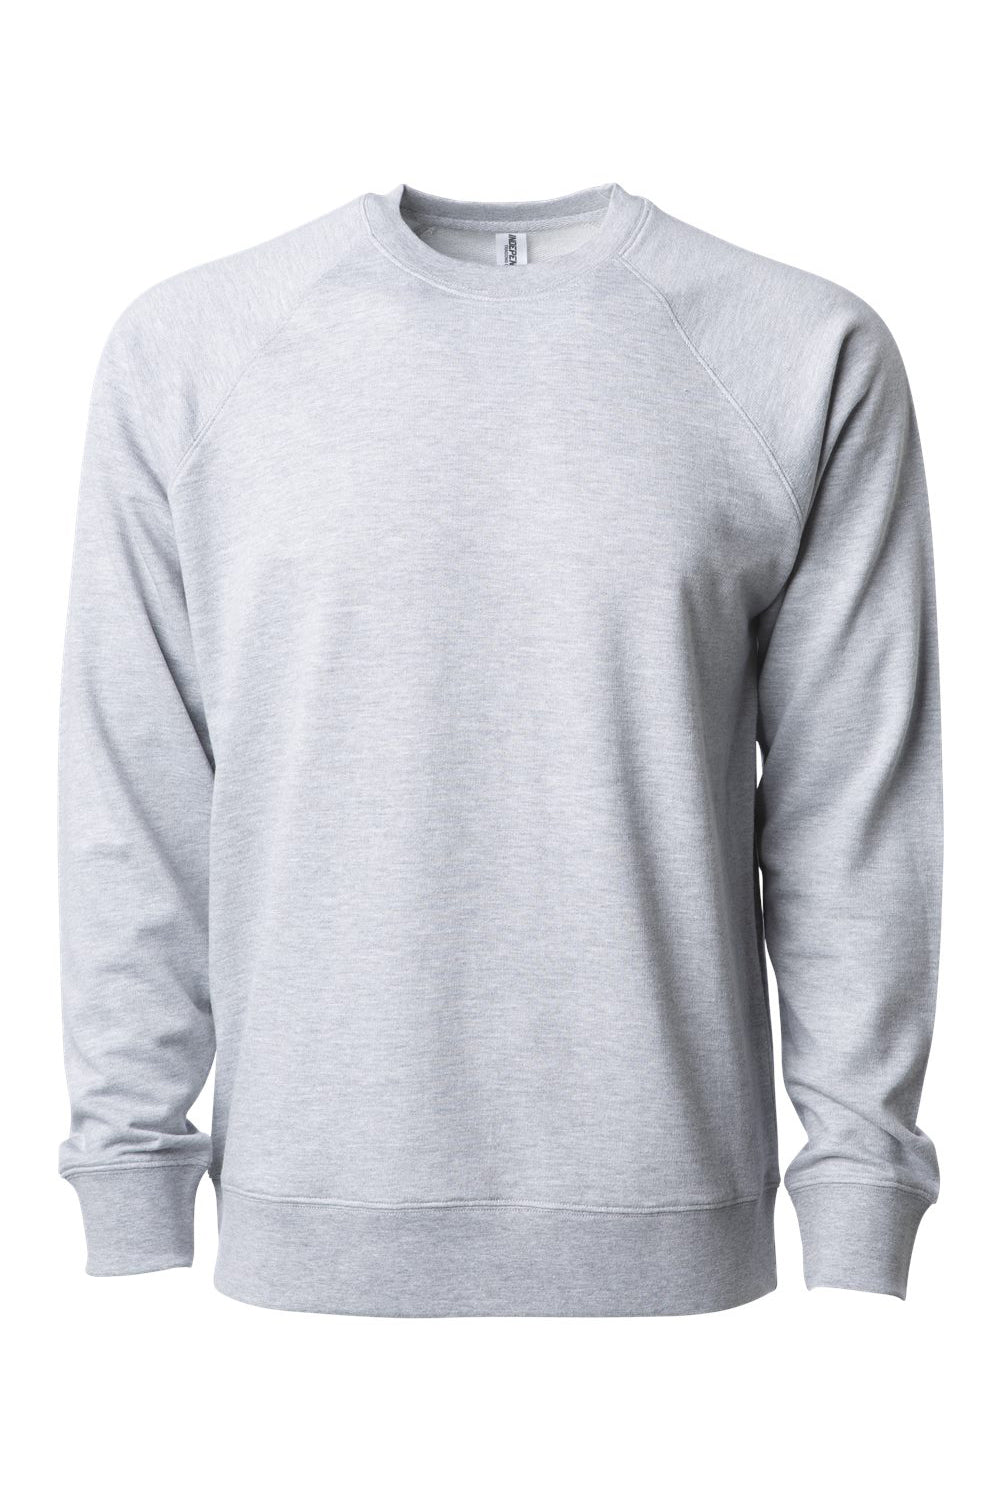 Independent Trading Co. SS1000C Mens Icon Loopback Terry Crewneck Sweatshirt Heather Grey Flat Front